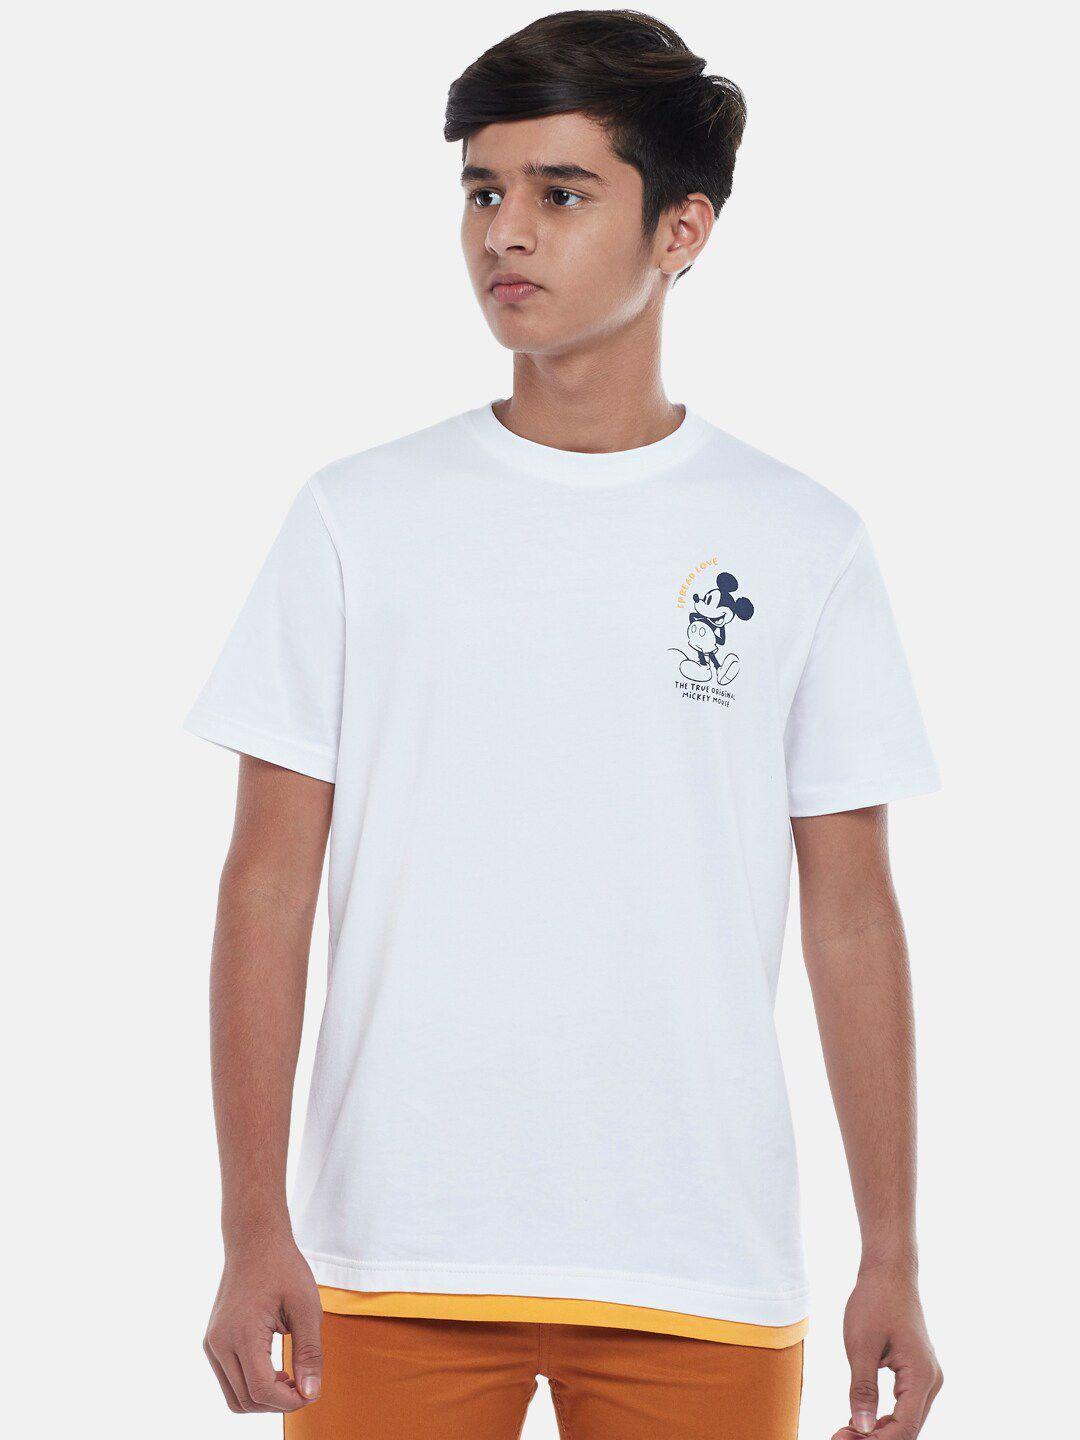 coolsters by pantaloons boys white & yellow printed t-shirt